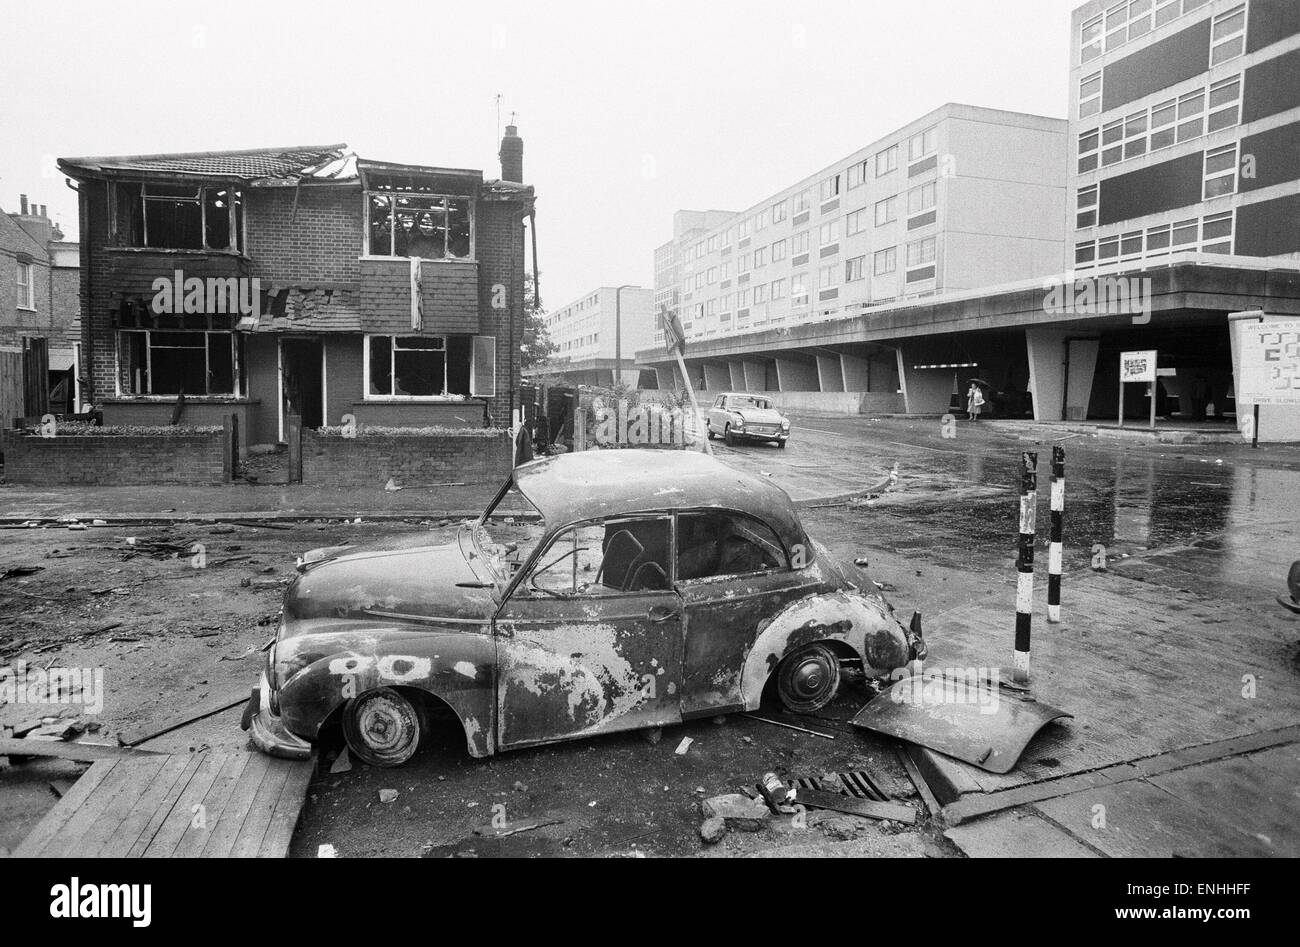 Aftermath of the riots which broke out in the Broadwater Farm estate in Tottenham, North London. The riot started the day after local resident Cynthia Jarrett died during a disturbance while police searched her home. Picture shows a burnt out car in the B Stock Photo